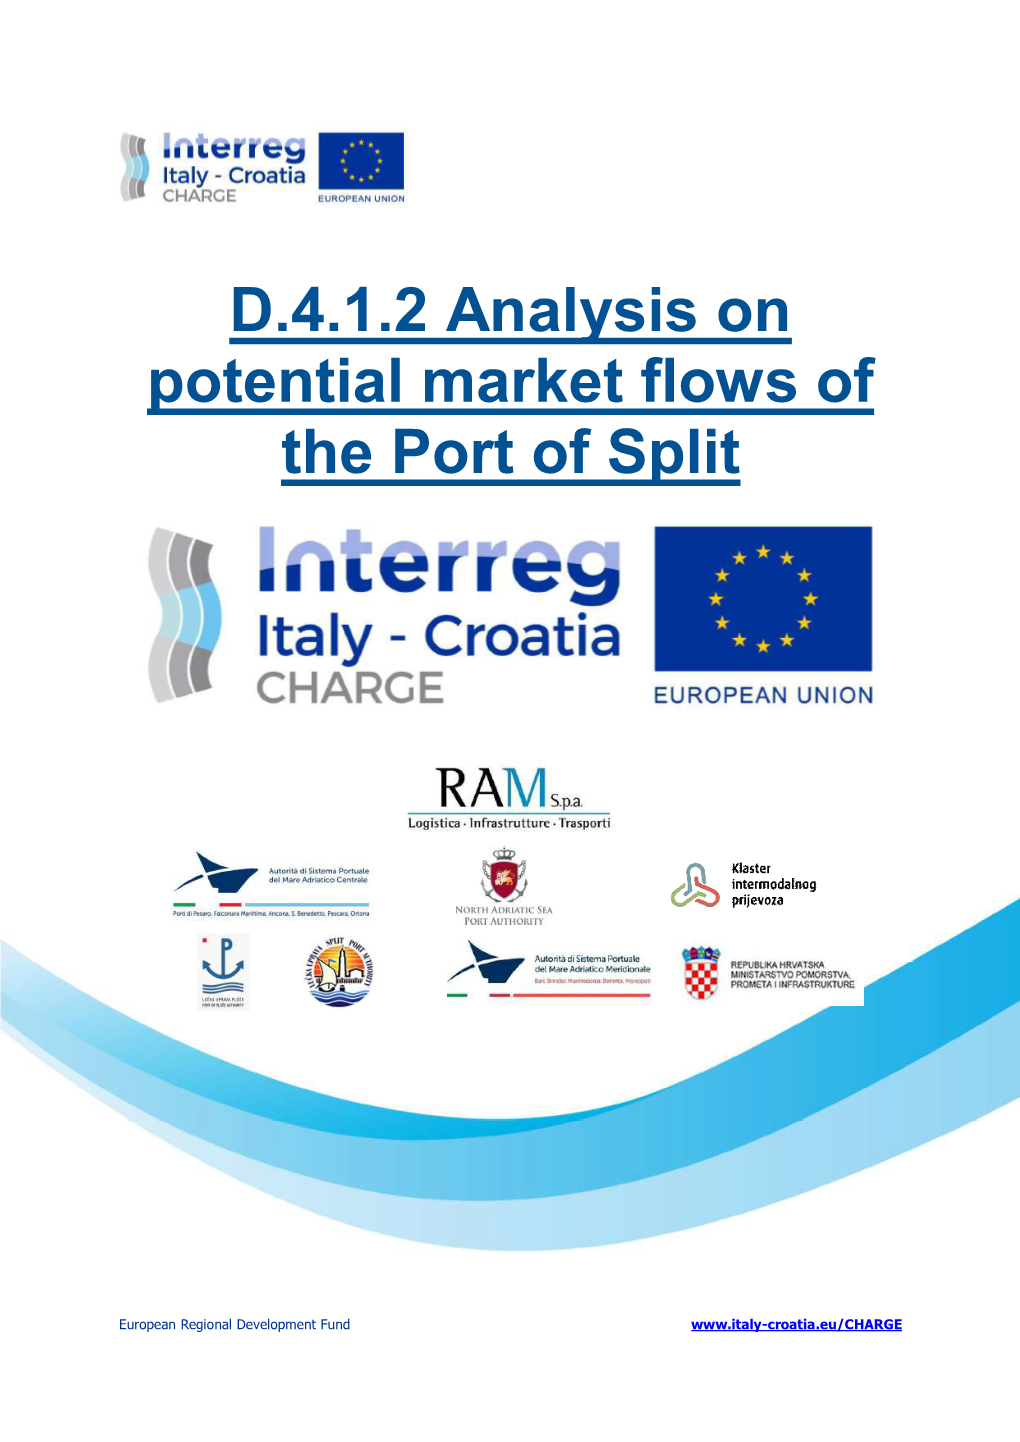 D.4.1.2 Analysis on Potential Market Flows of the Port of Split